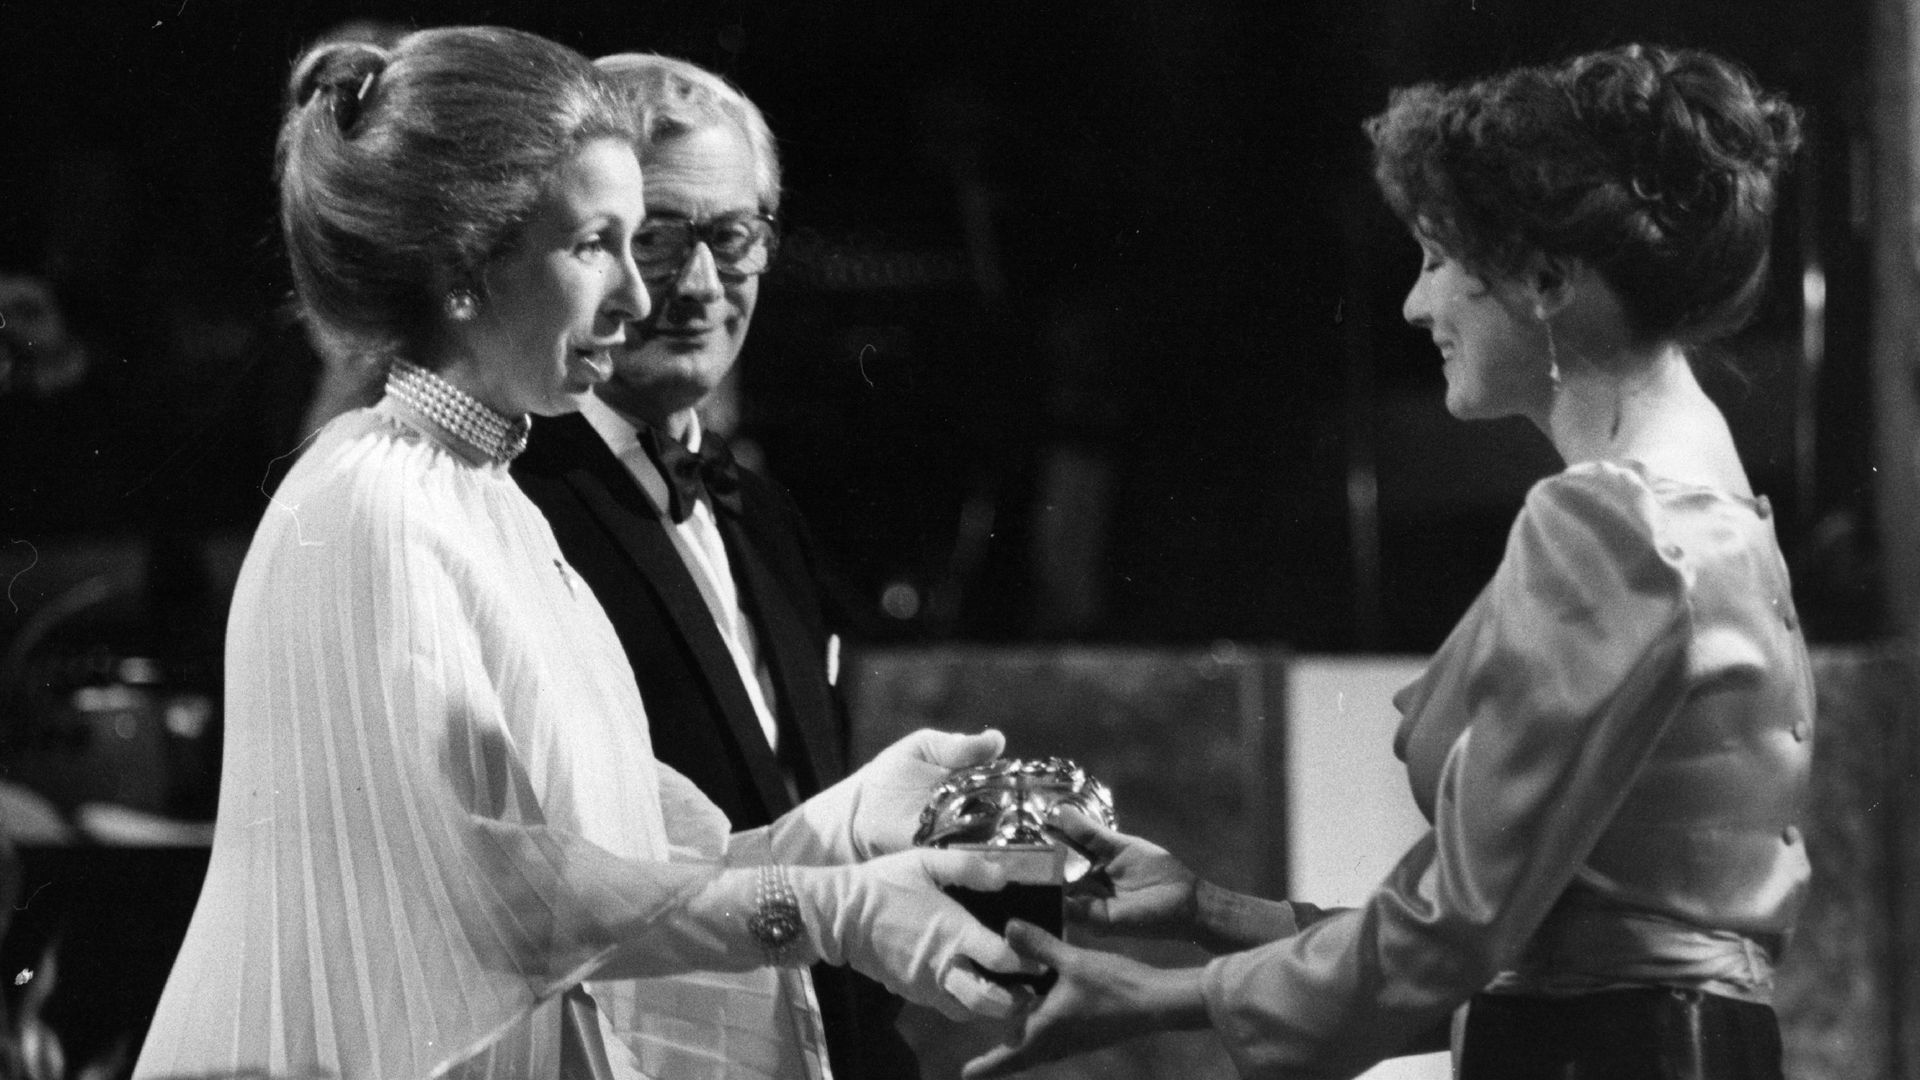 A BAFTA award being presented by HRH Princess Anne to Francesca Annis for her part in The Comedy of Errors